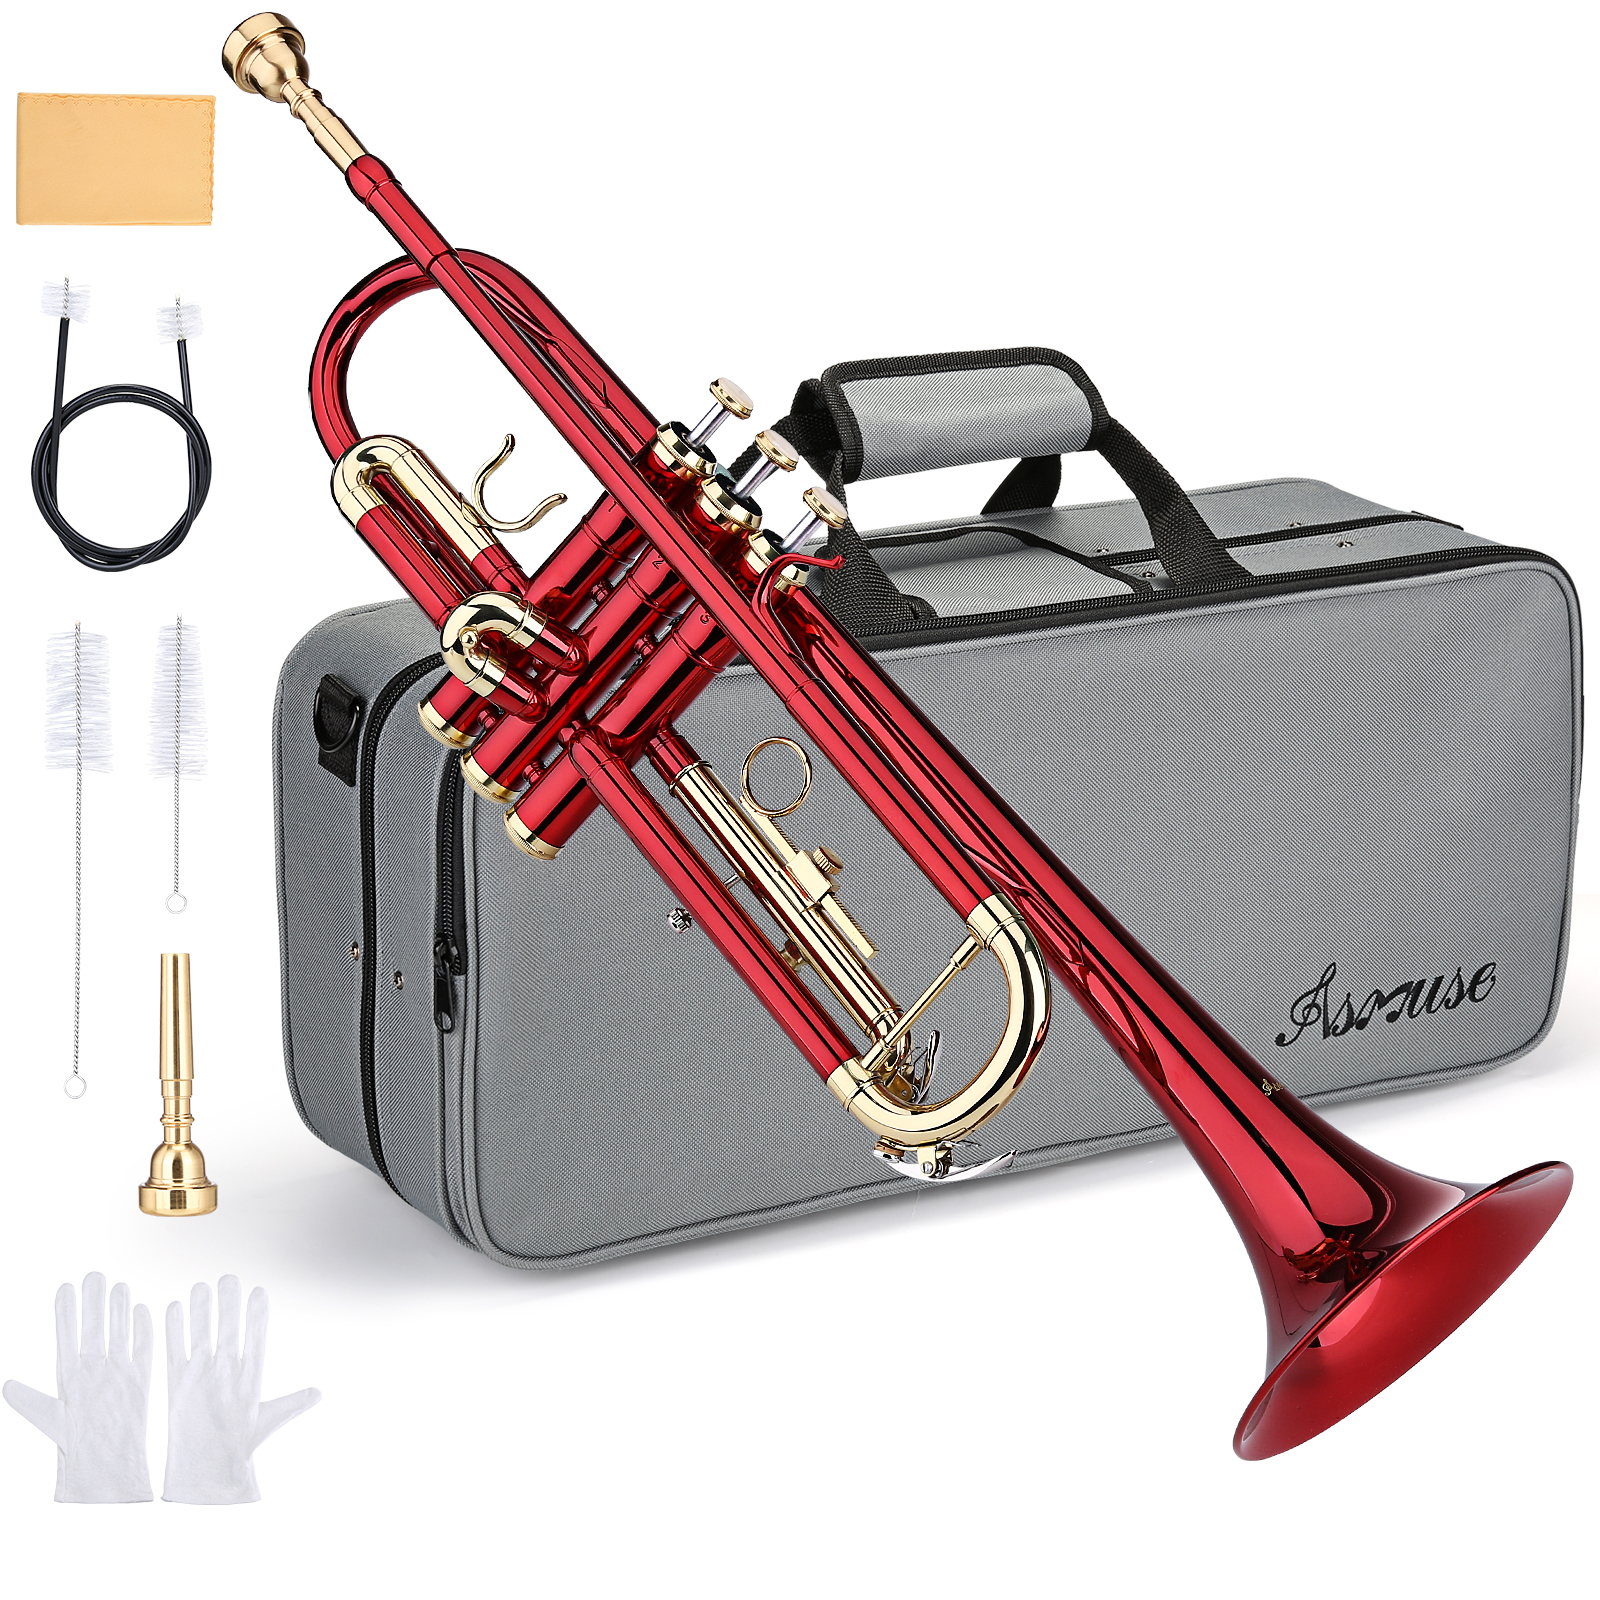 Color:Red:BB TRUMPET- STUDENT BAND TRUMPETS BRASS INSTRUMENT WITH HARD CASE FOR BEGINNER